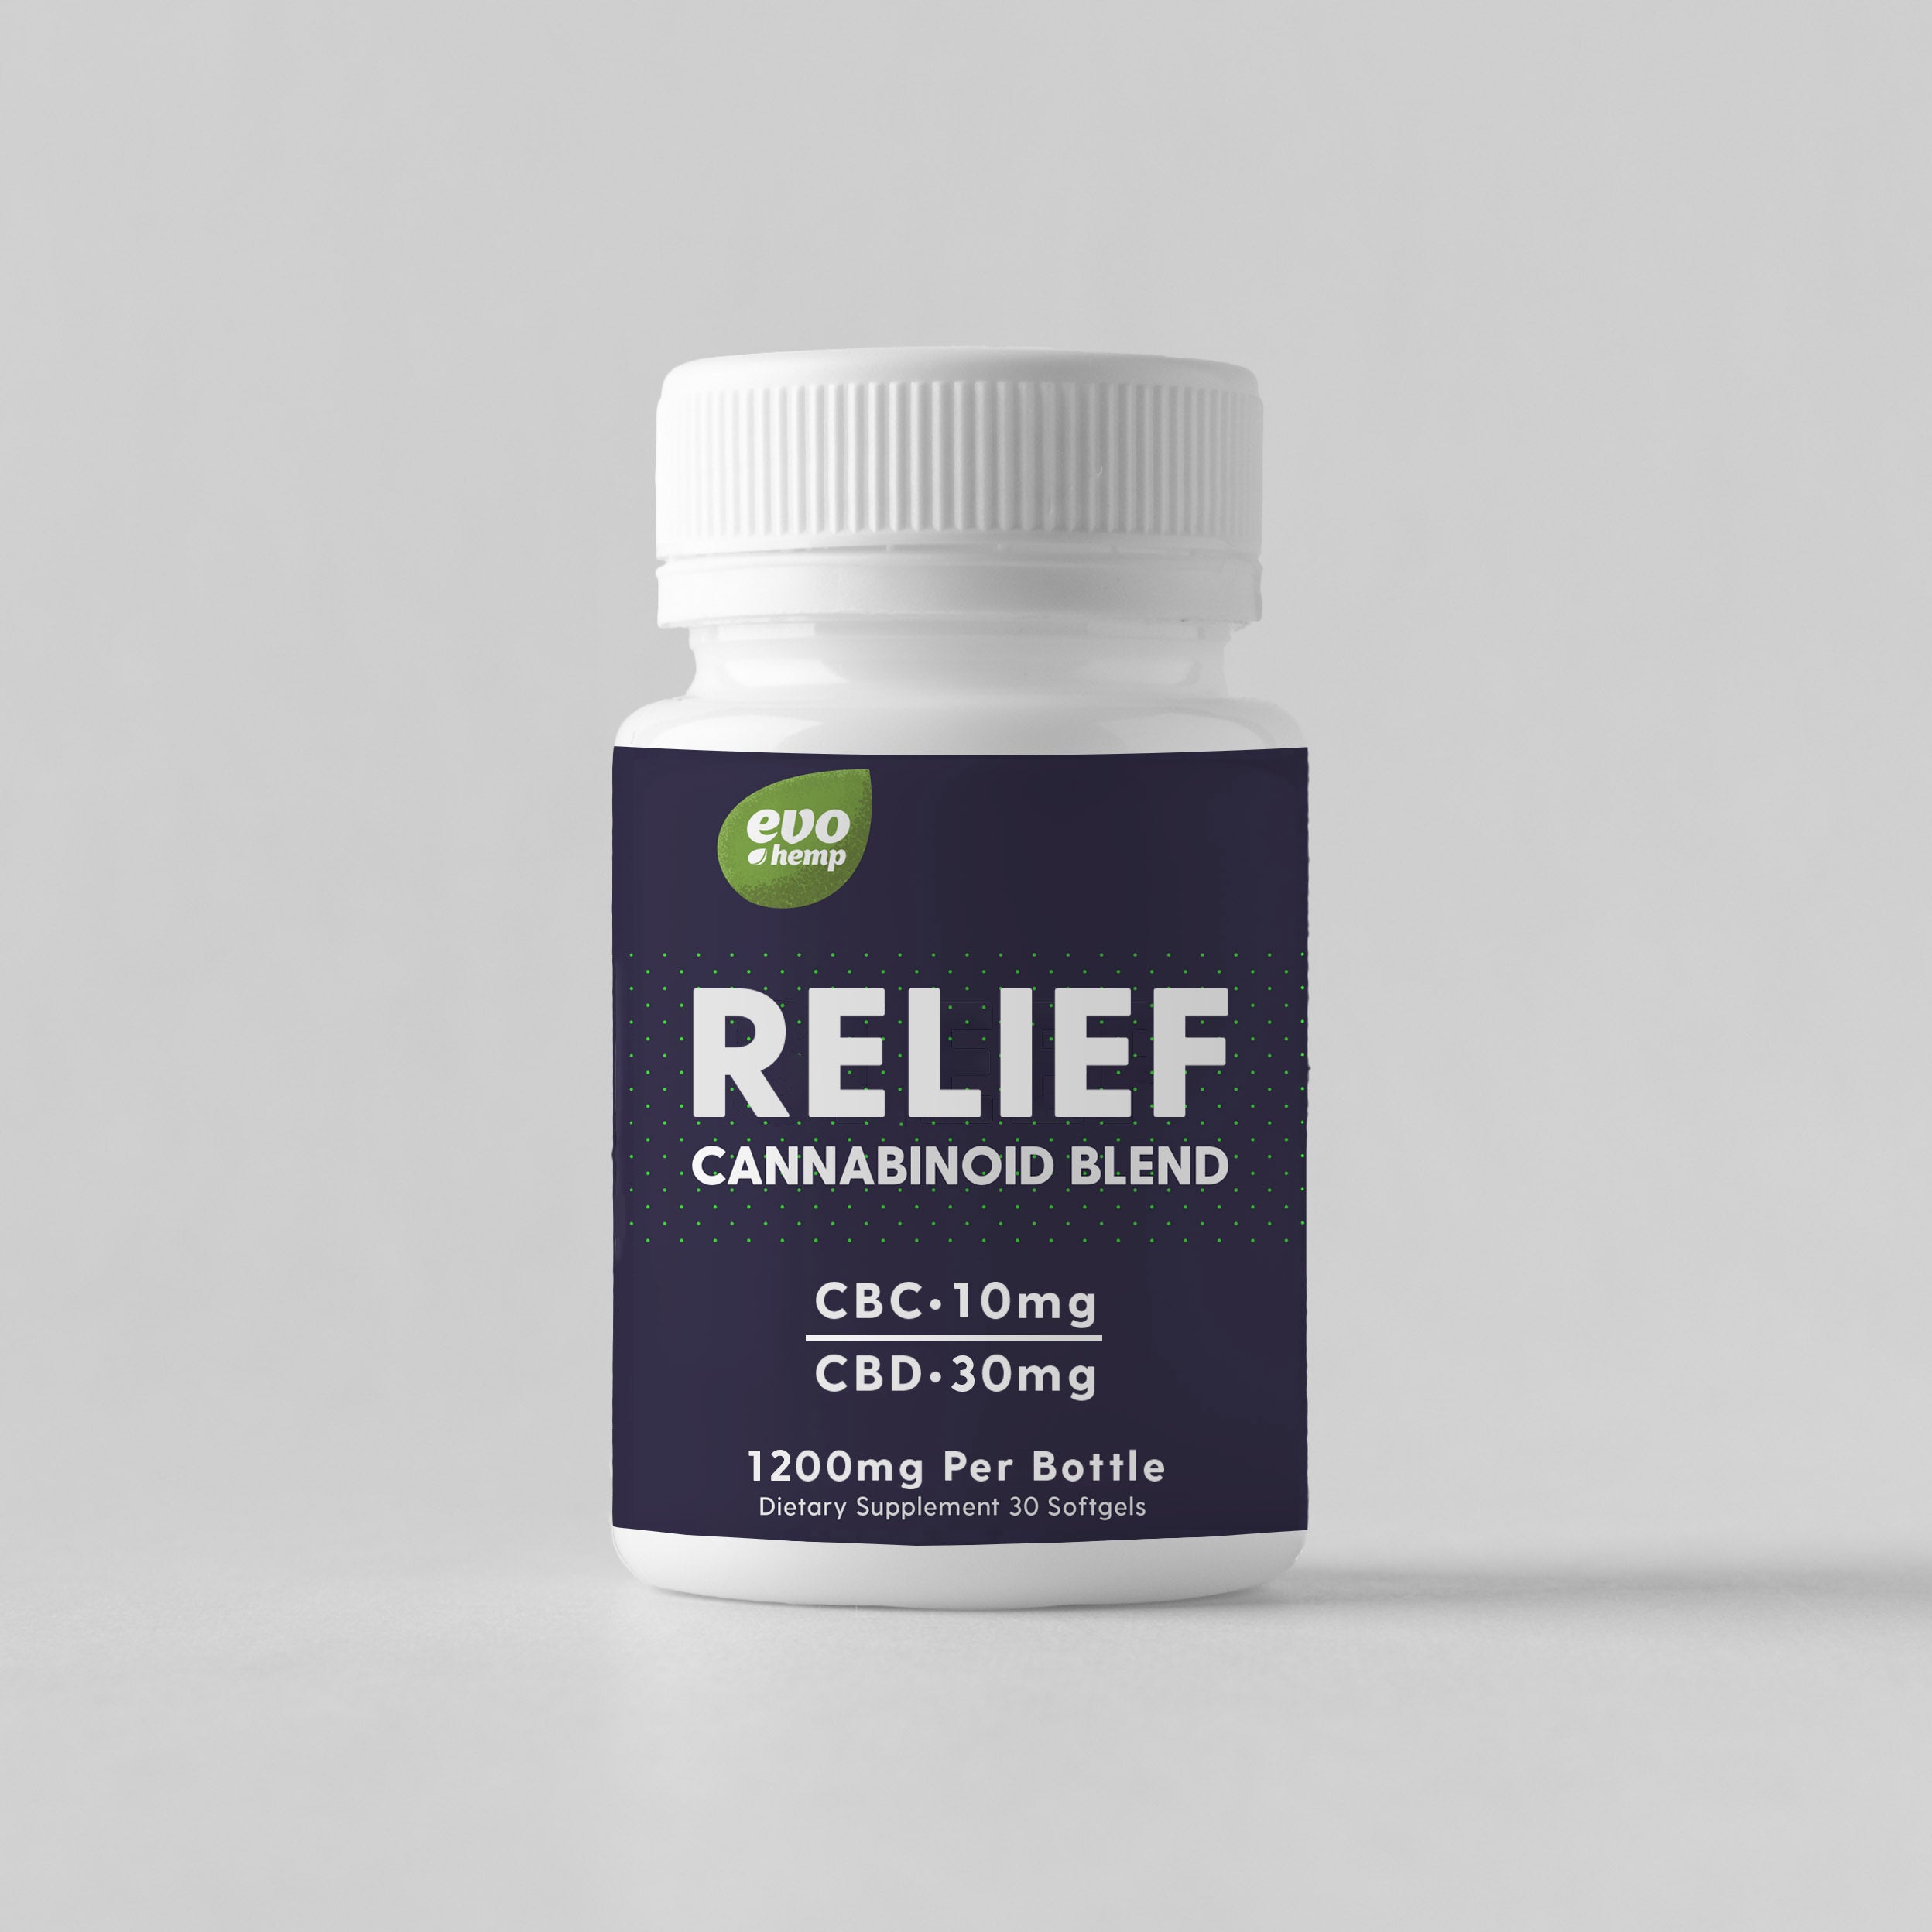 Relief Blend